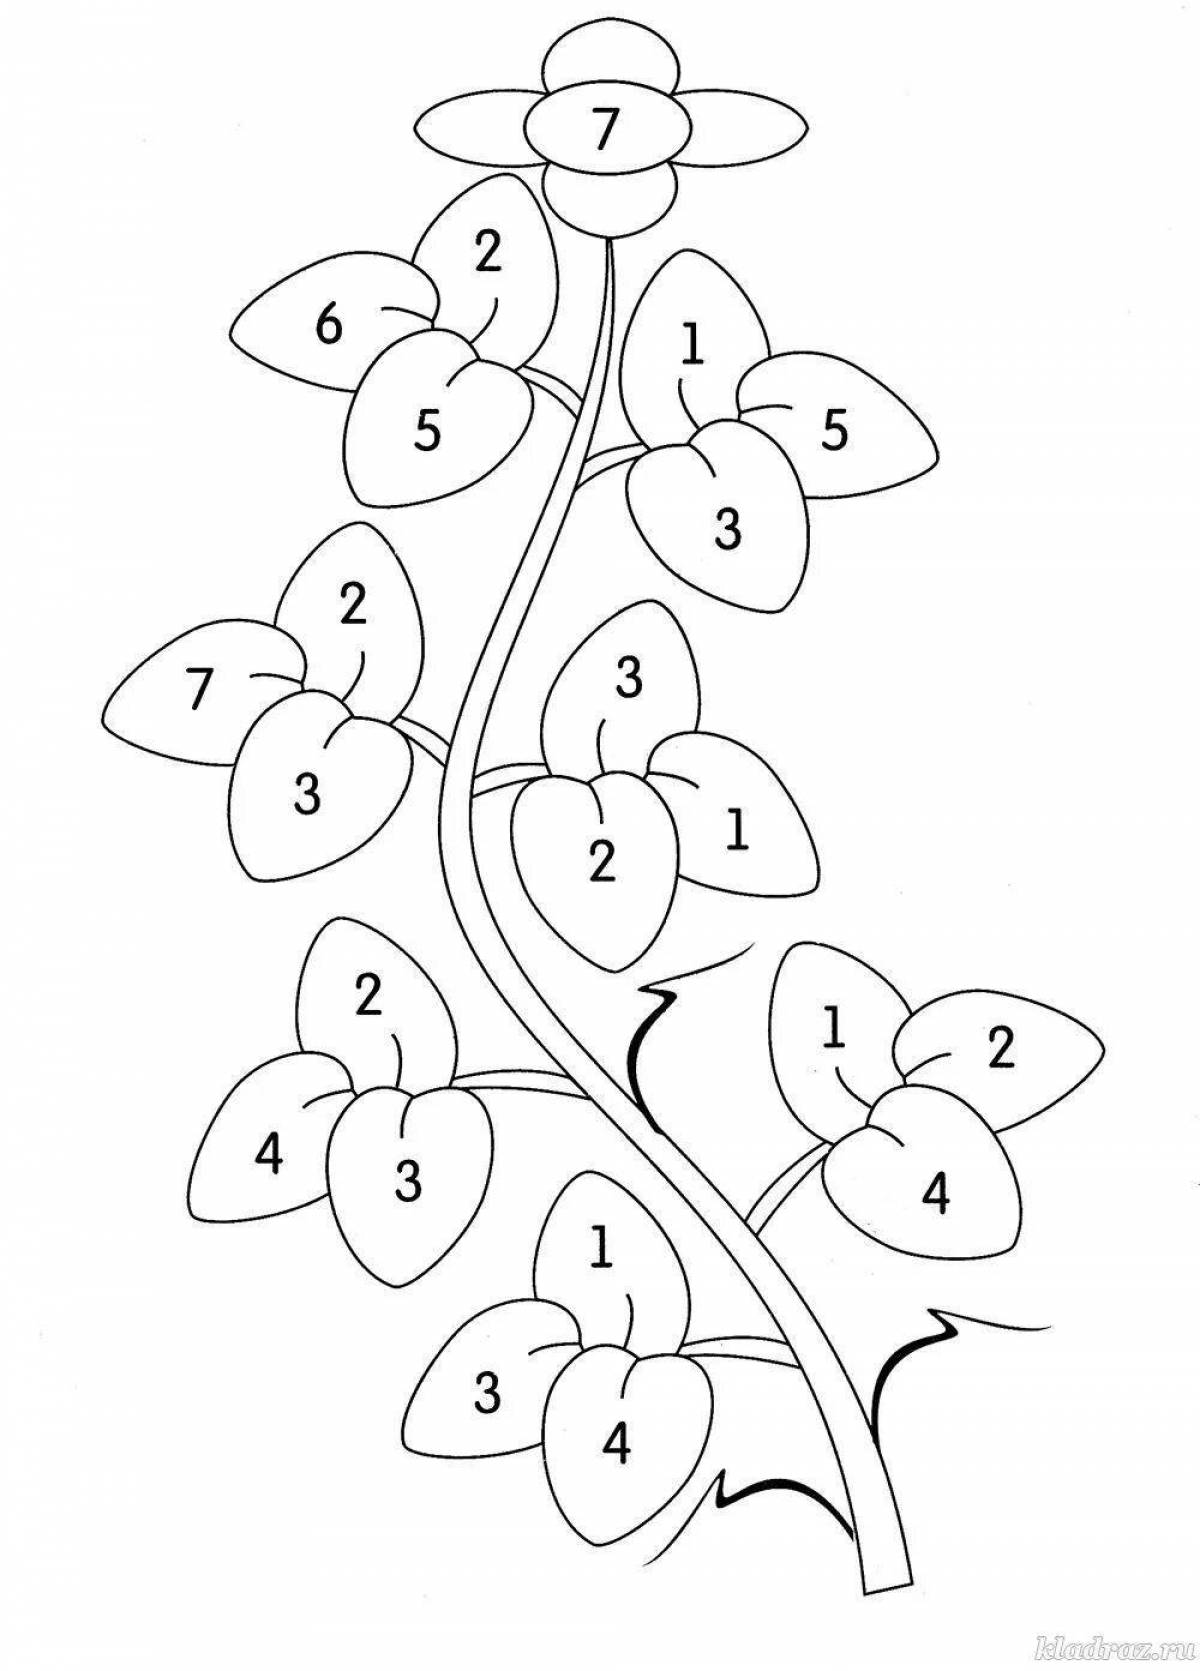 Bright coloring page number 7 composition